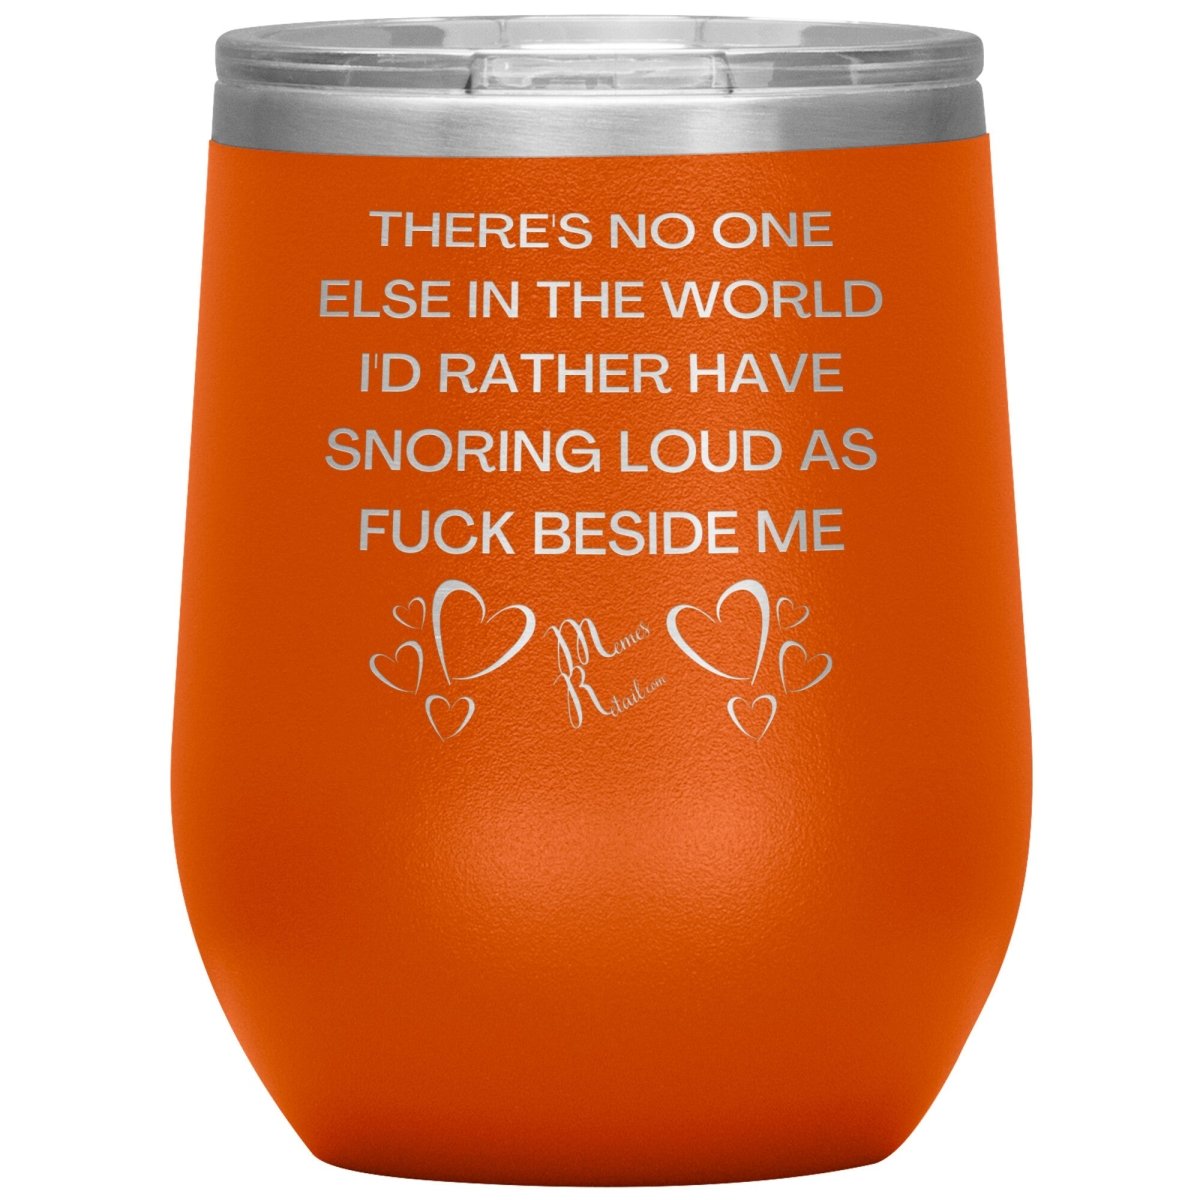 There's No One Else in the World I'd Rather Have Snoring Loud, 12oz Wine Insulated Tumbler / Orange - MemesRetail.com